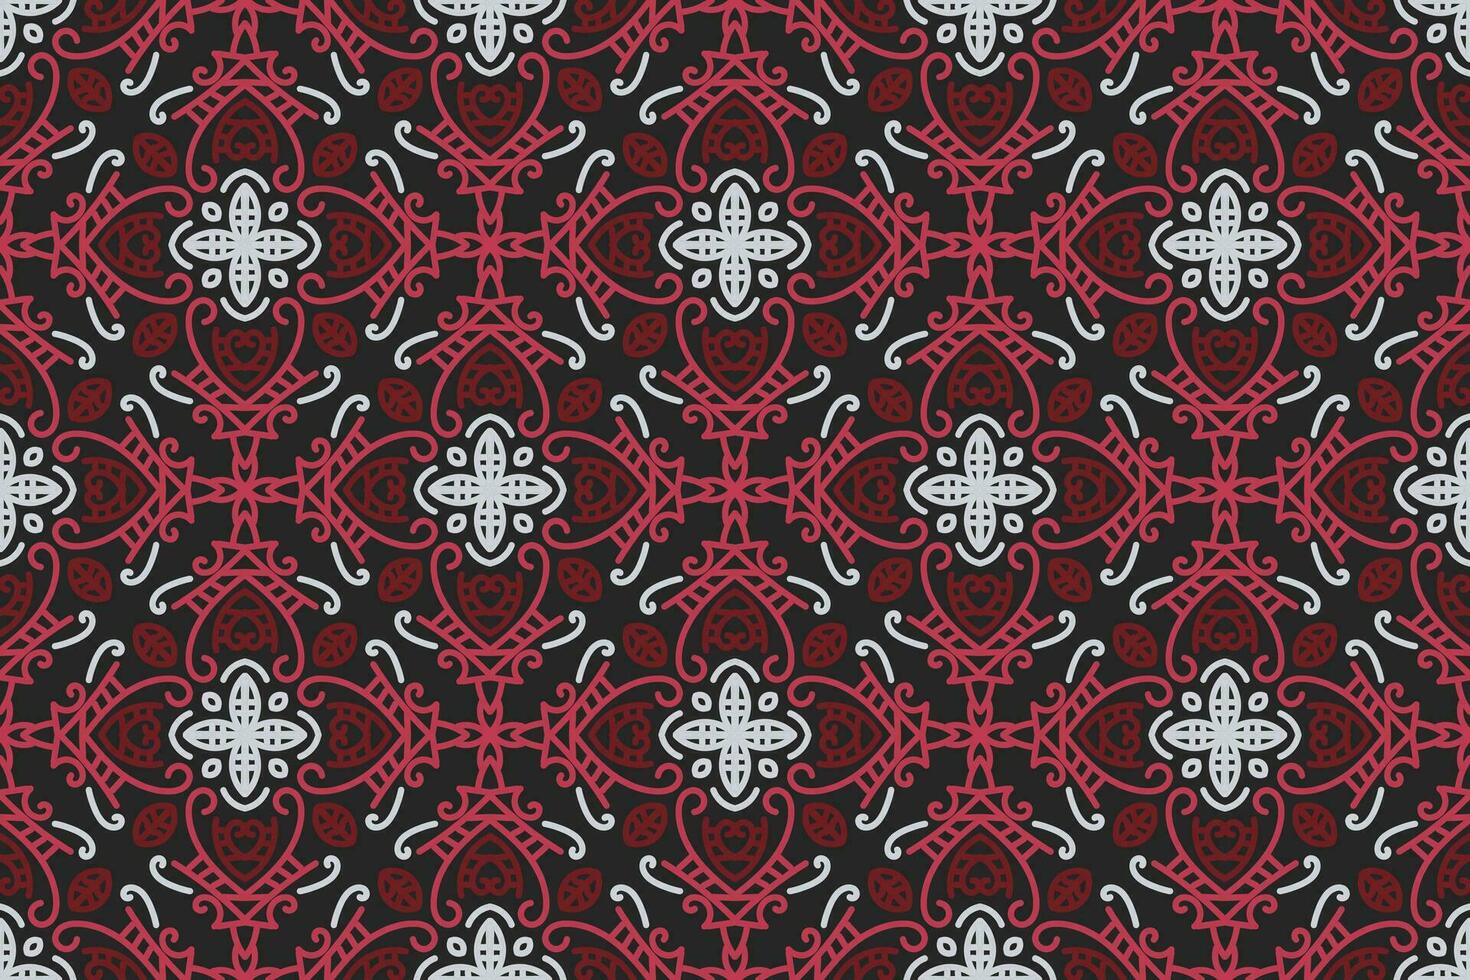 oriental patterns. White, red and black background with Arabic ornaments. Pattern, background and wallpaper for your design. Textile ornament. Vector illustration.